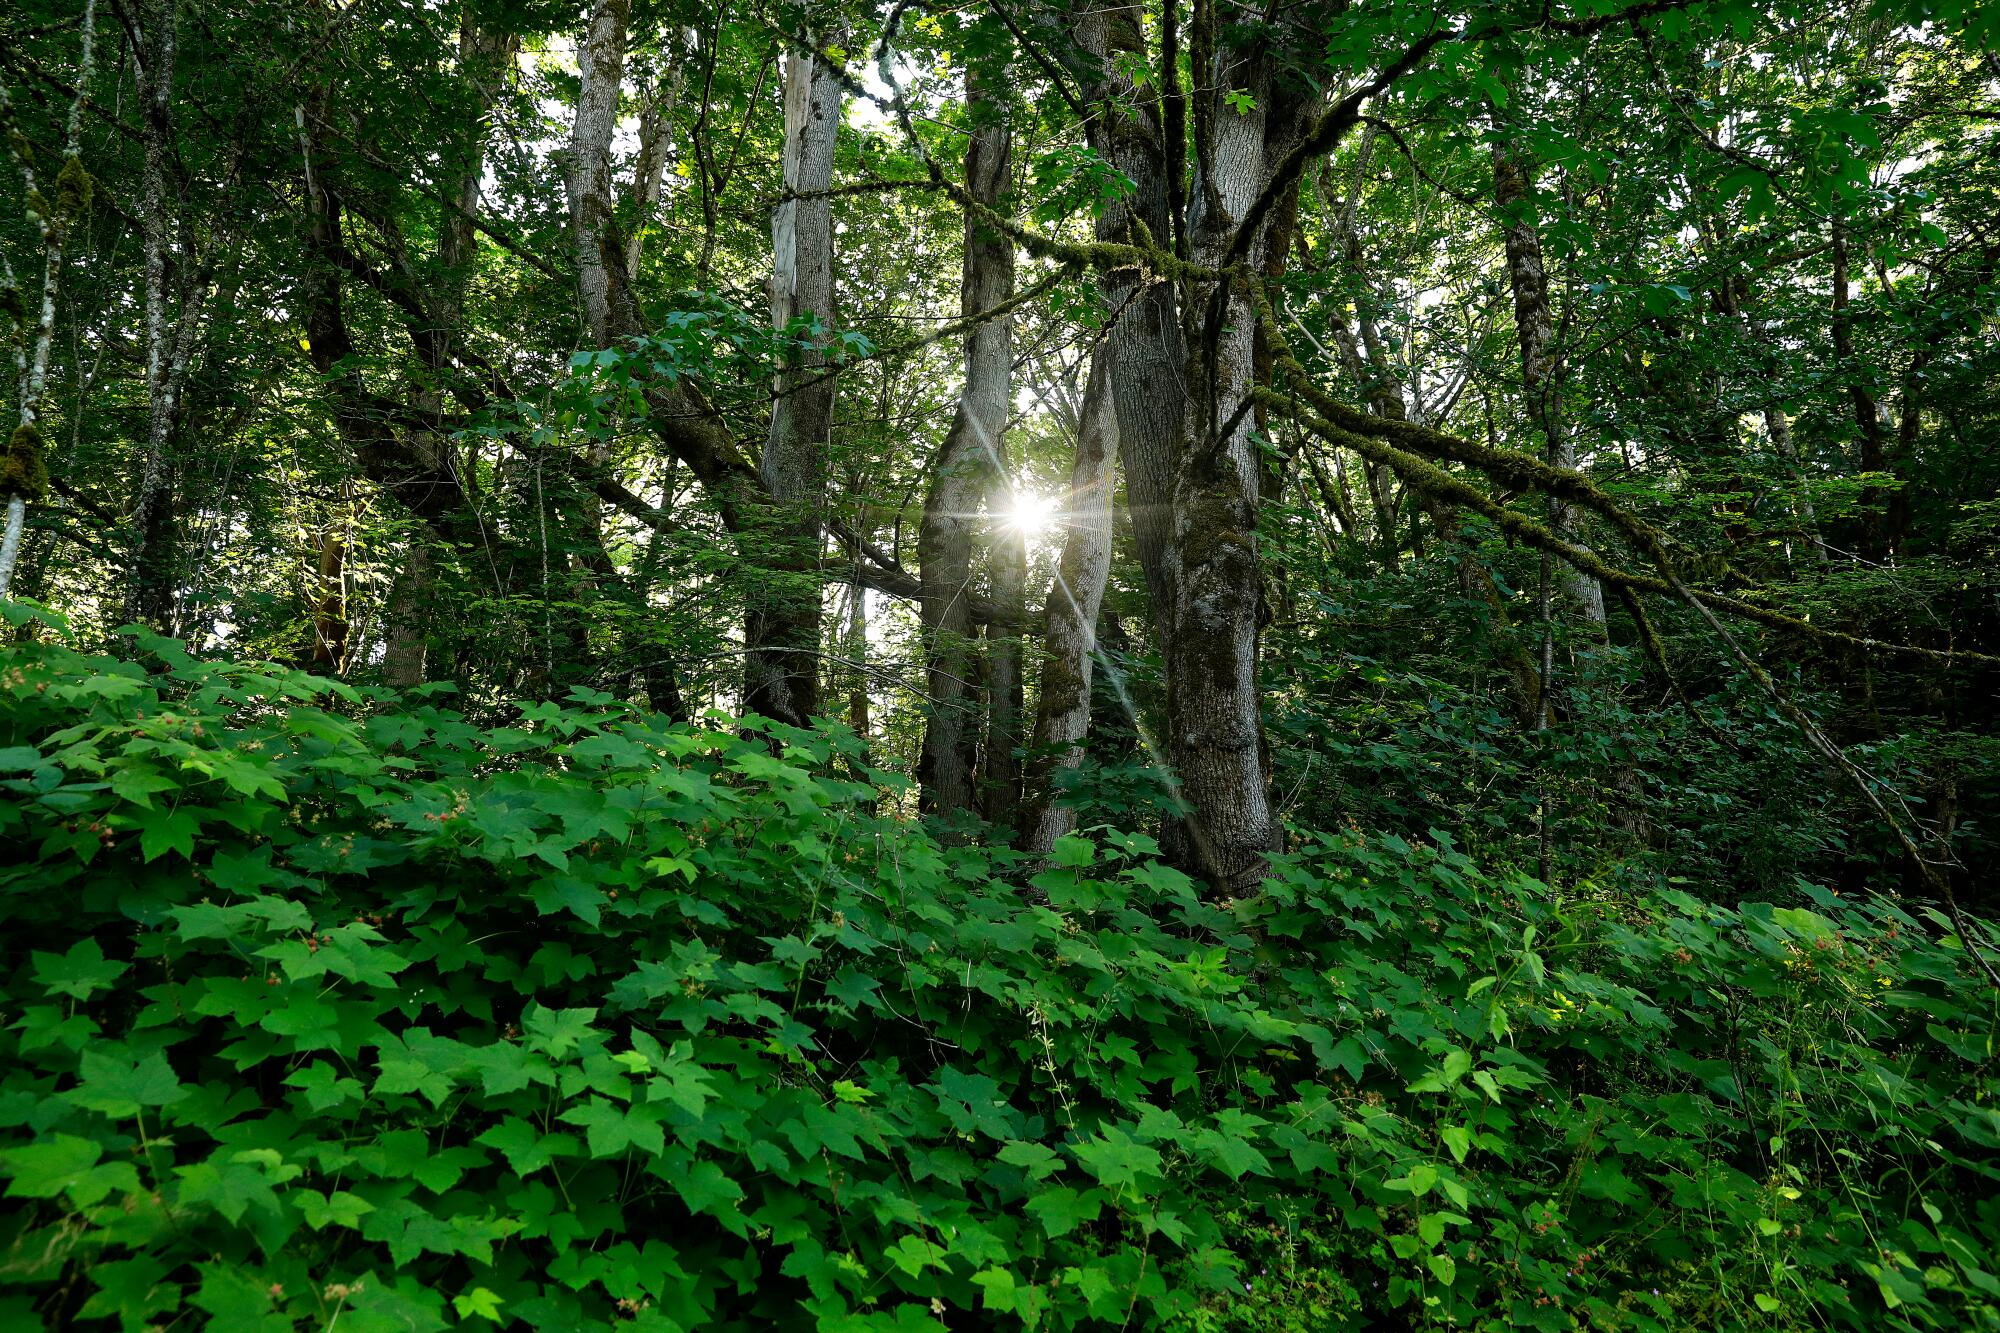 A green forest, with the sun peeking out between tall trees.